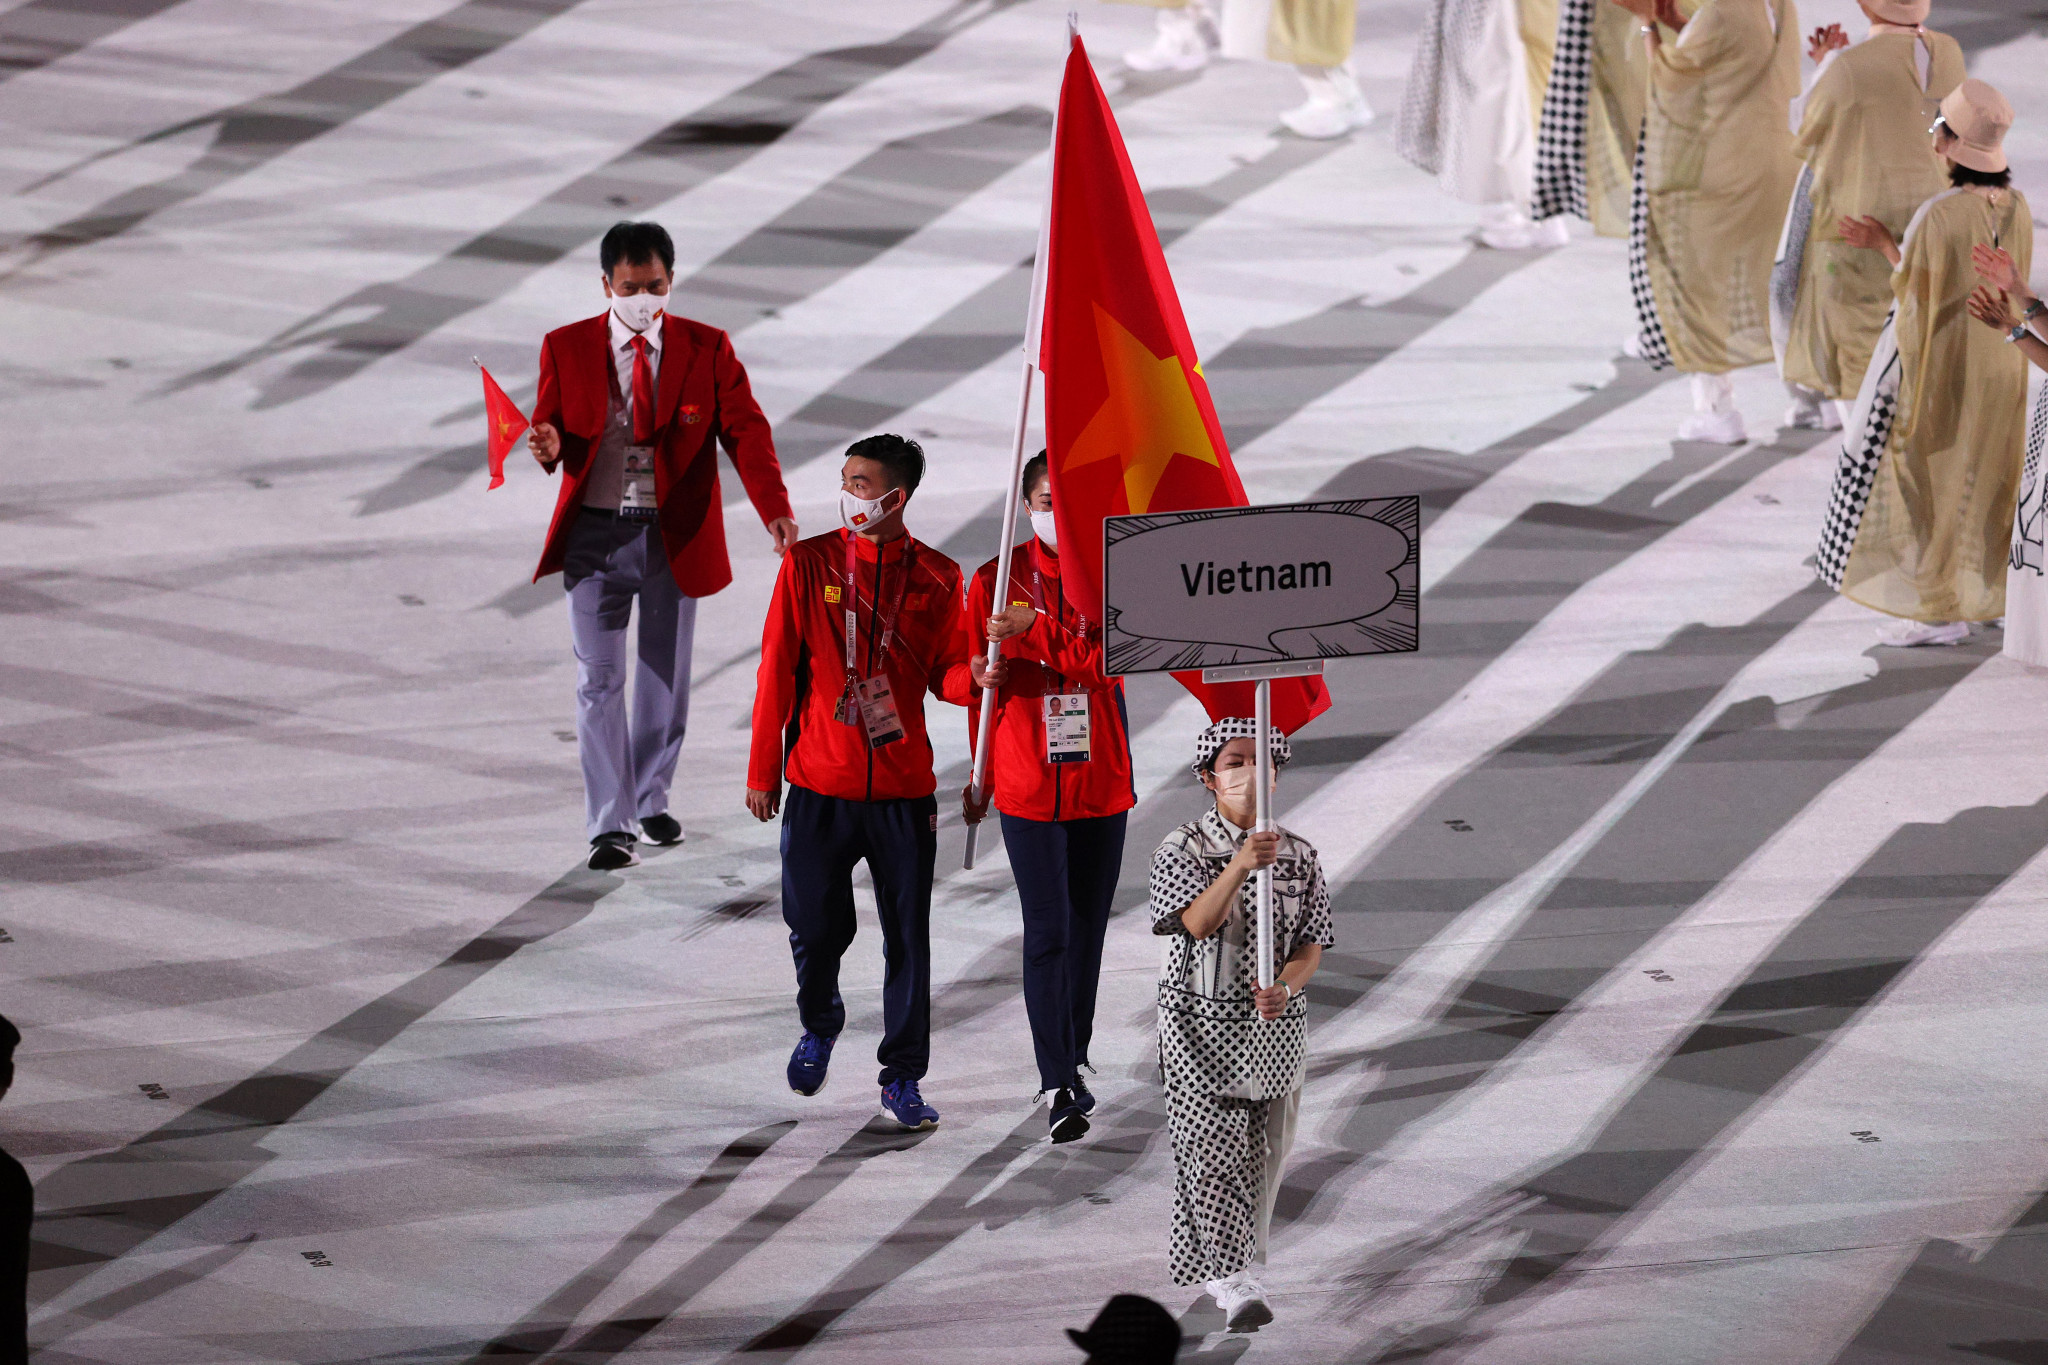 Nguyễn Huy Hoàng, left, also served as Vietnam's flagbearer at Tokyo 2020 alongside Quách Thị Lan ©Getty Images